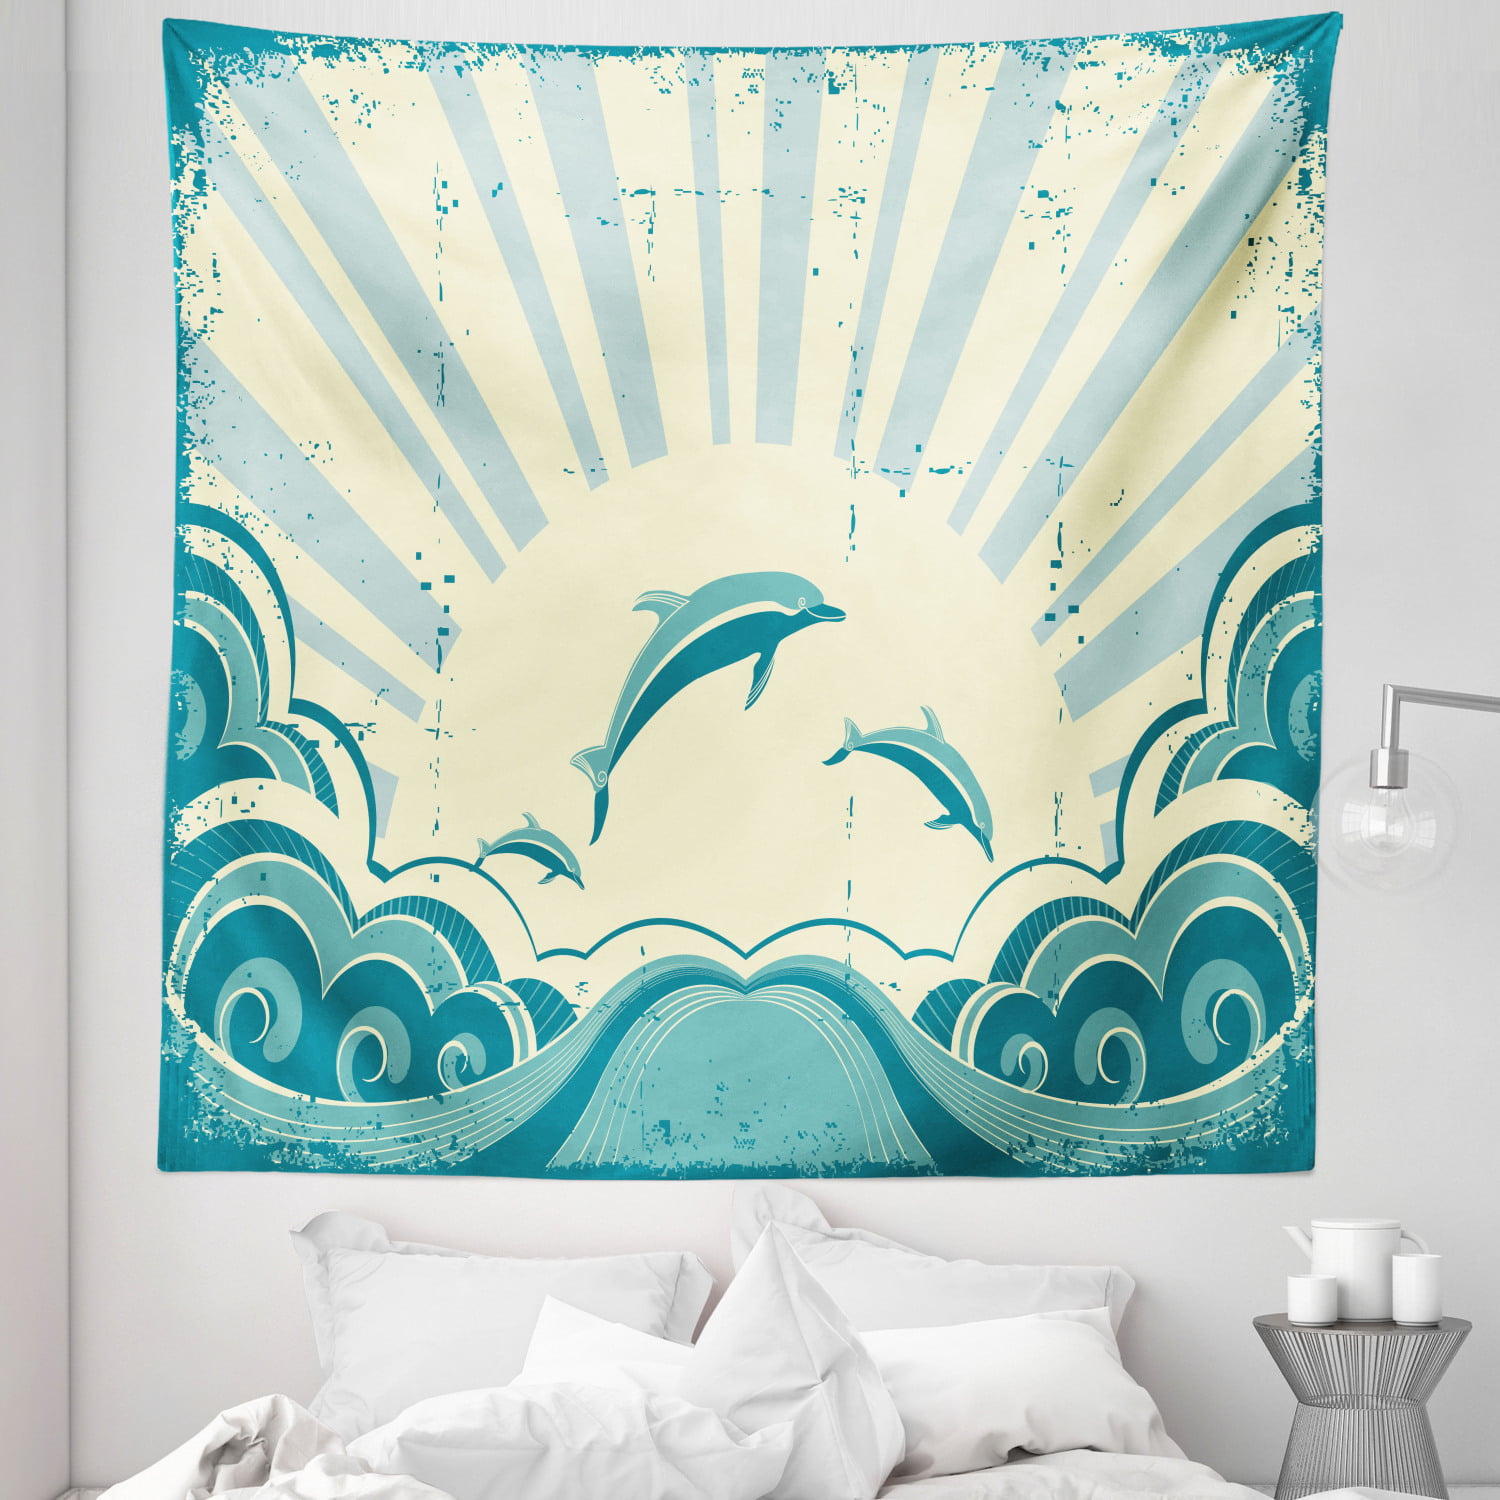 Blue Sea Dolphin Tapestry India Wall Art Hanging Tapestry Room Bedspread Decor 